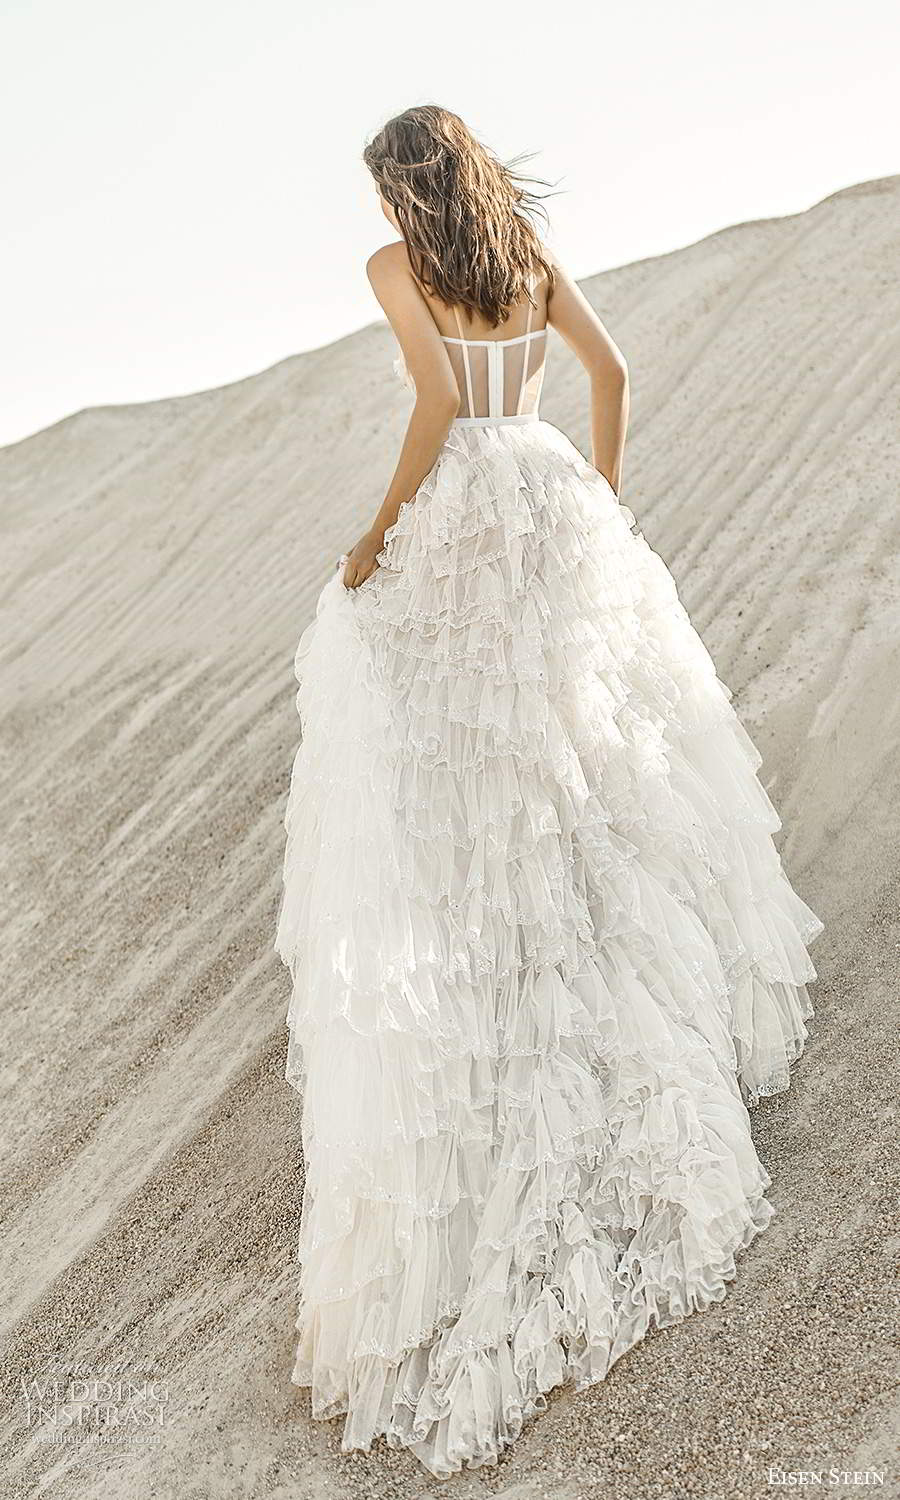 eisen stein fall 2021 bridal sleeveless thing straps semi sweetheart ruched bodice a line ball gown wedding dress tiered slit skirt chapel train (5) bv